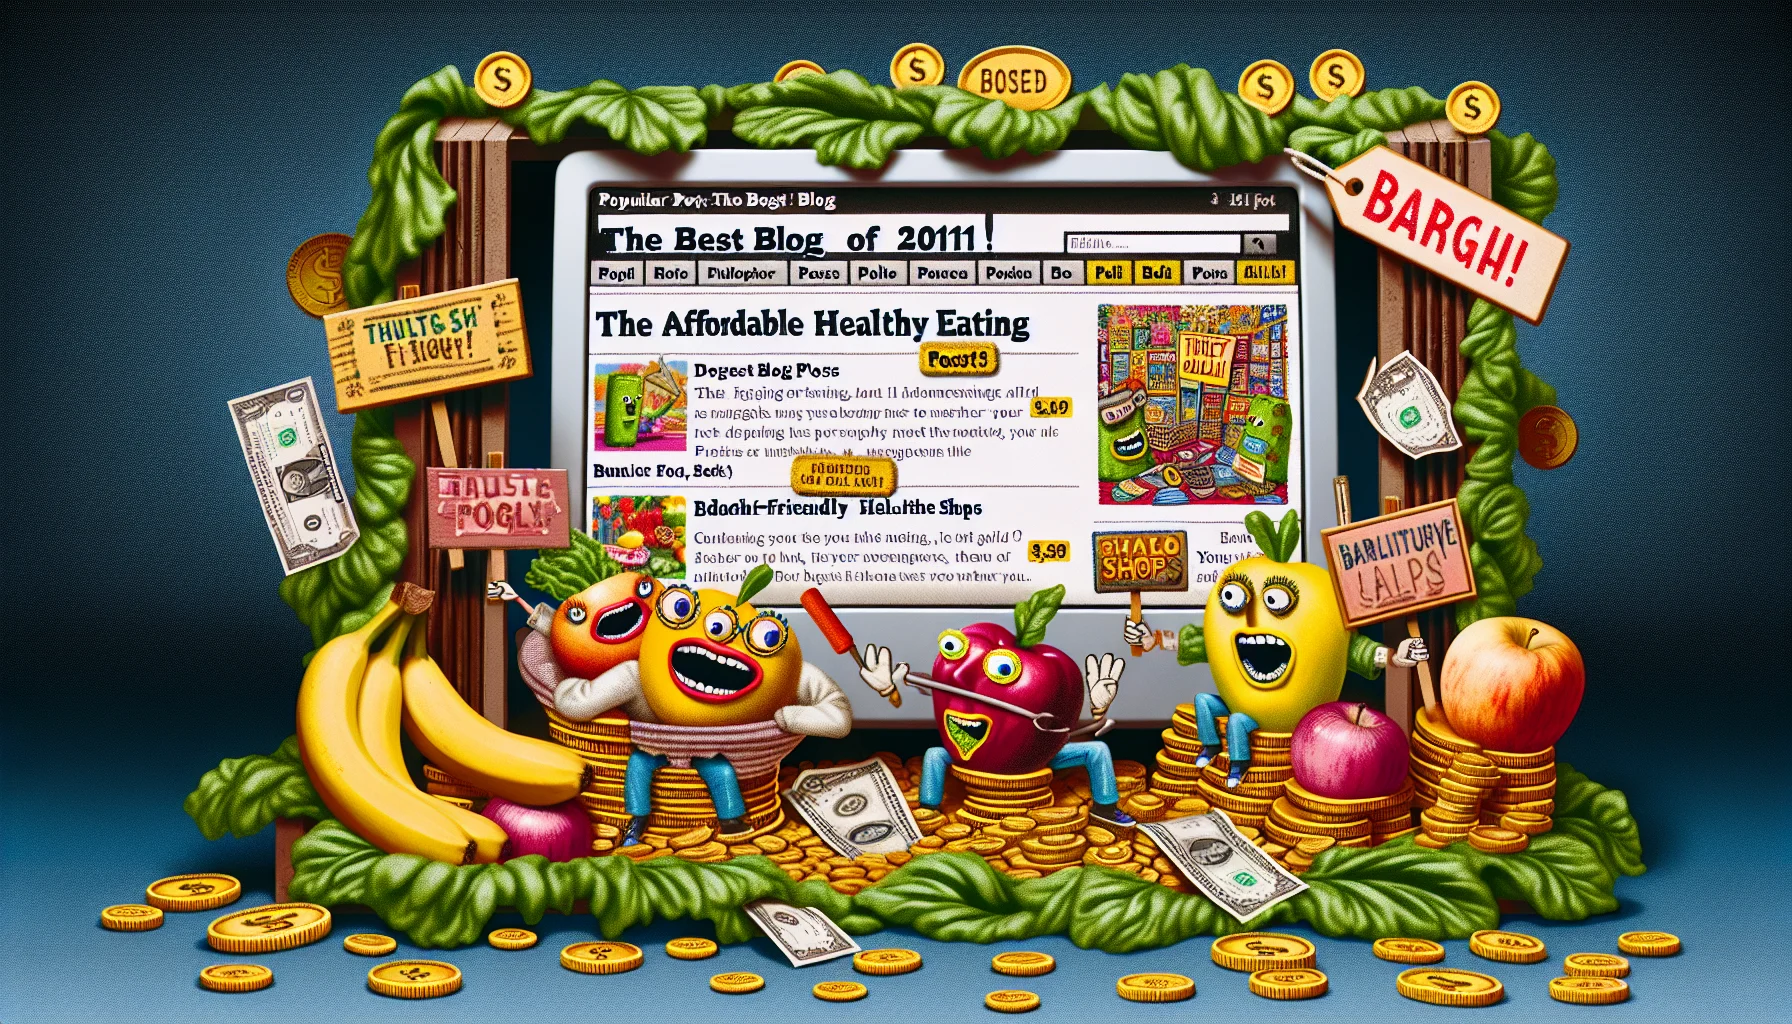 Visualize a humorous scenario featuring the best blog posts of 2011, meant to interest people in affordable, healthy eating. Picture a digital screen splashed with vibrant, appetizing images of fruits and vegetables acting out funny, frugal thrift shop scenes. The screen is open to a 2011 health blog with an engaging layout showing popular posts, well-written articles and tips, all advocating for budget-friendly healthy meals. Surrounding the screen are cartoonish stacks of coins, dollar bills morphed into lettuce leaves, bananas as gold bars, and apples wearing bargain sales tags, all bringing in the theme of cost-effectiveness into the health narrative.